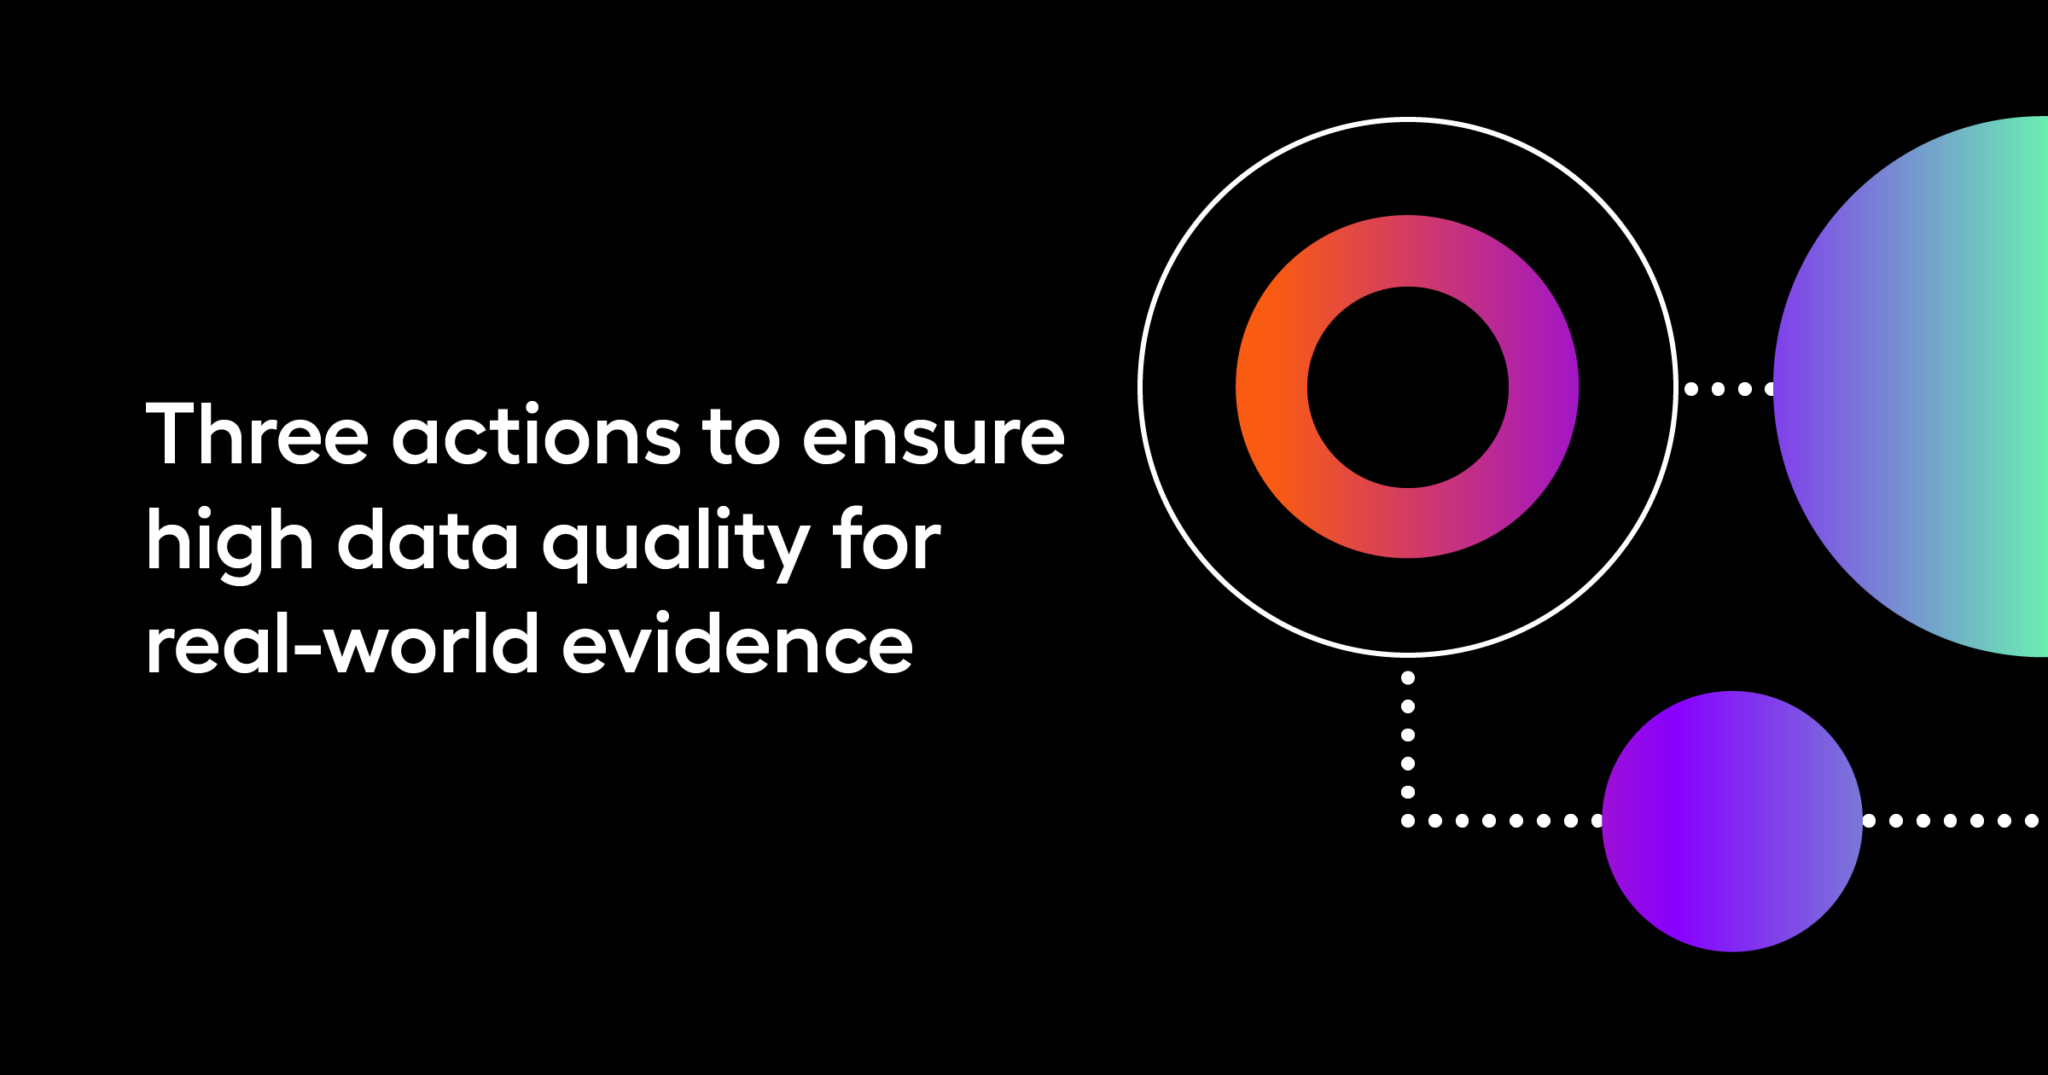 Three actions to ensure high data quality for real-world evidence